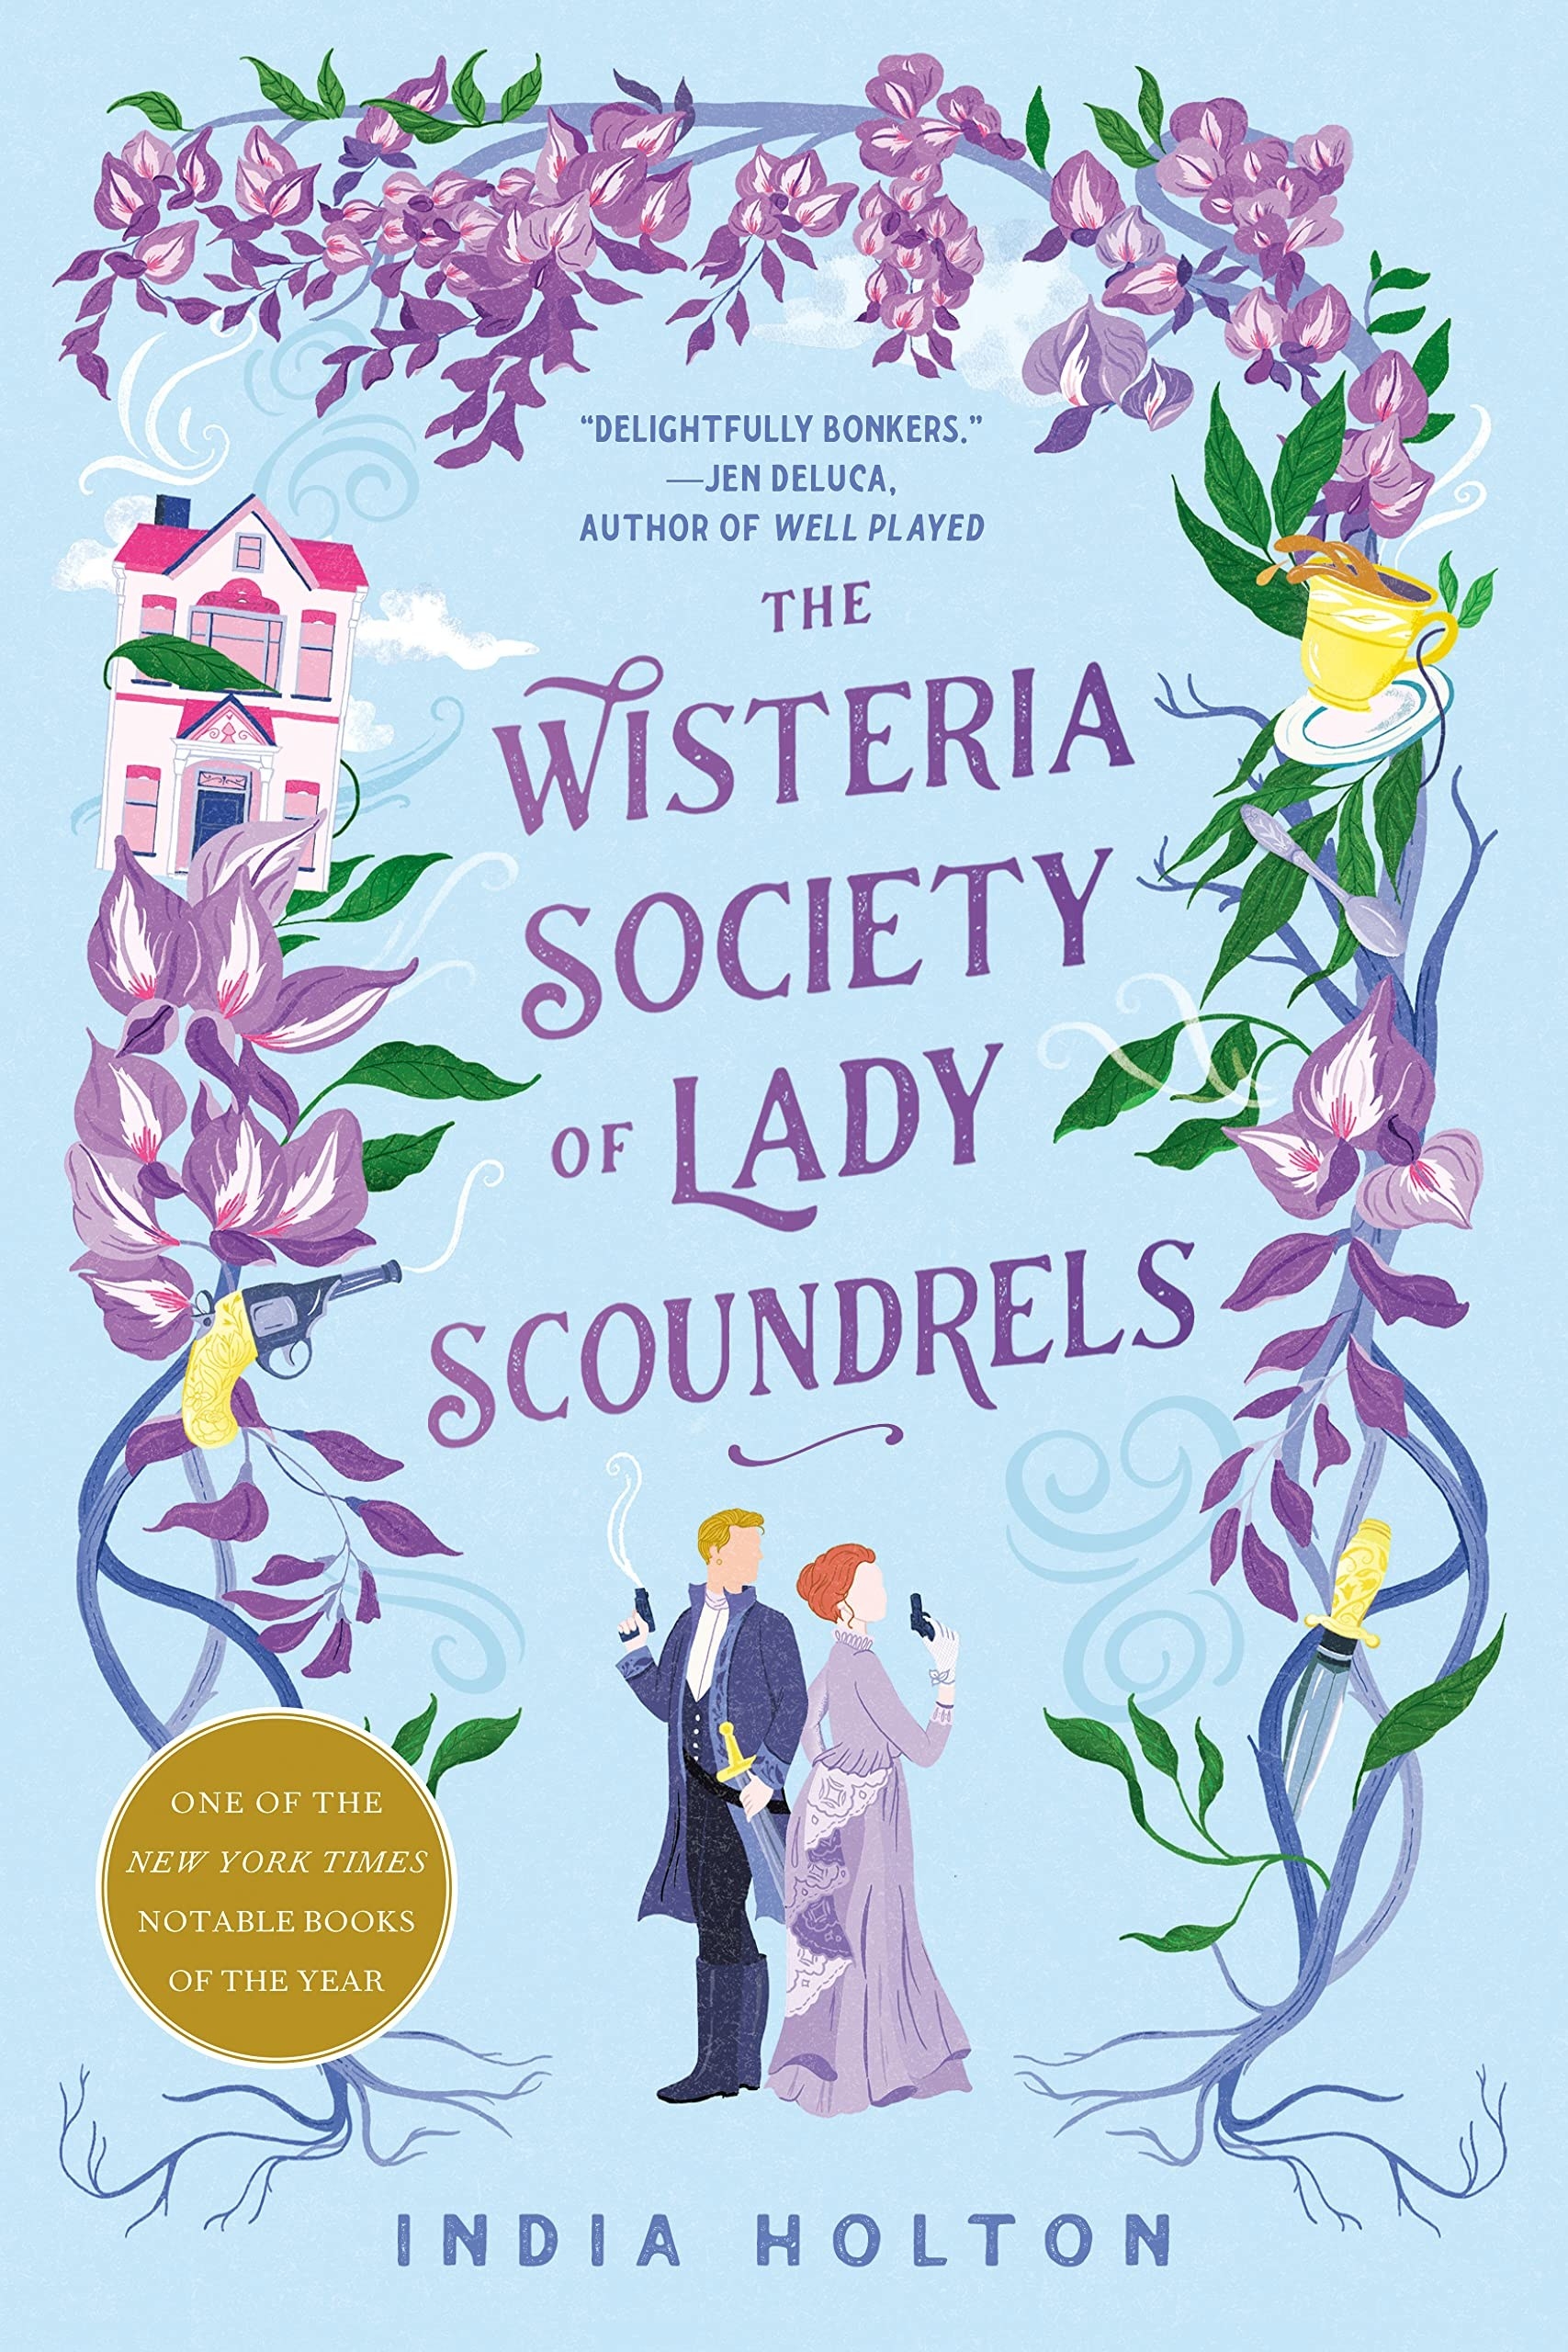 The Wisteria Society of Lady Scoundrels book cover. Book by India Holton